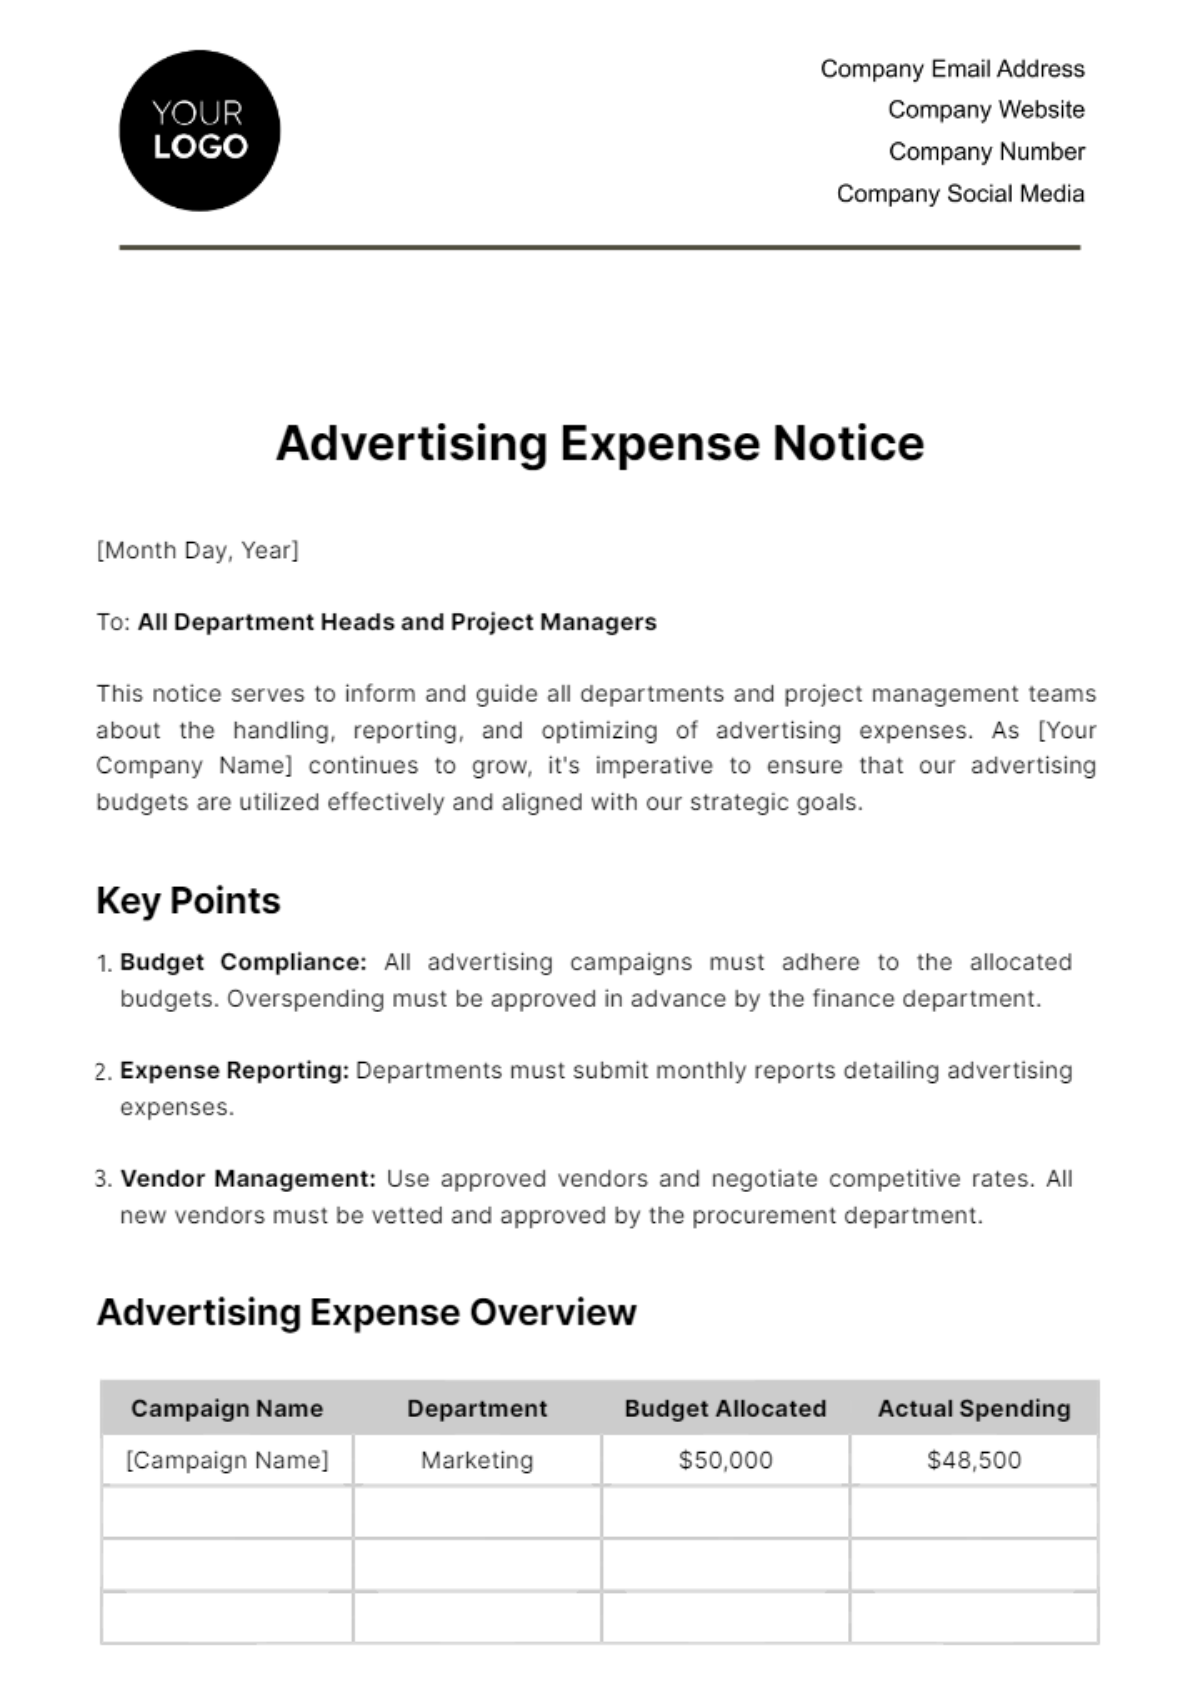 Free Advertising Expense Notice Template